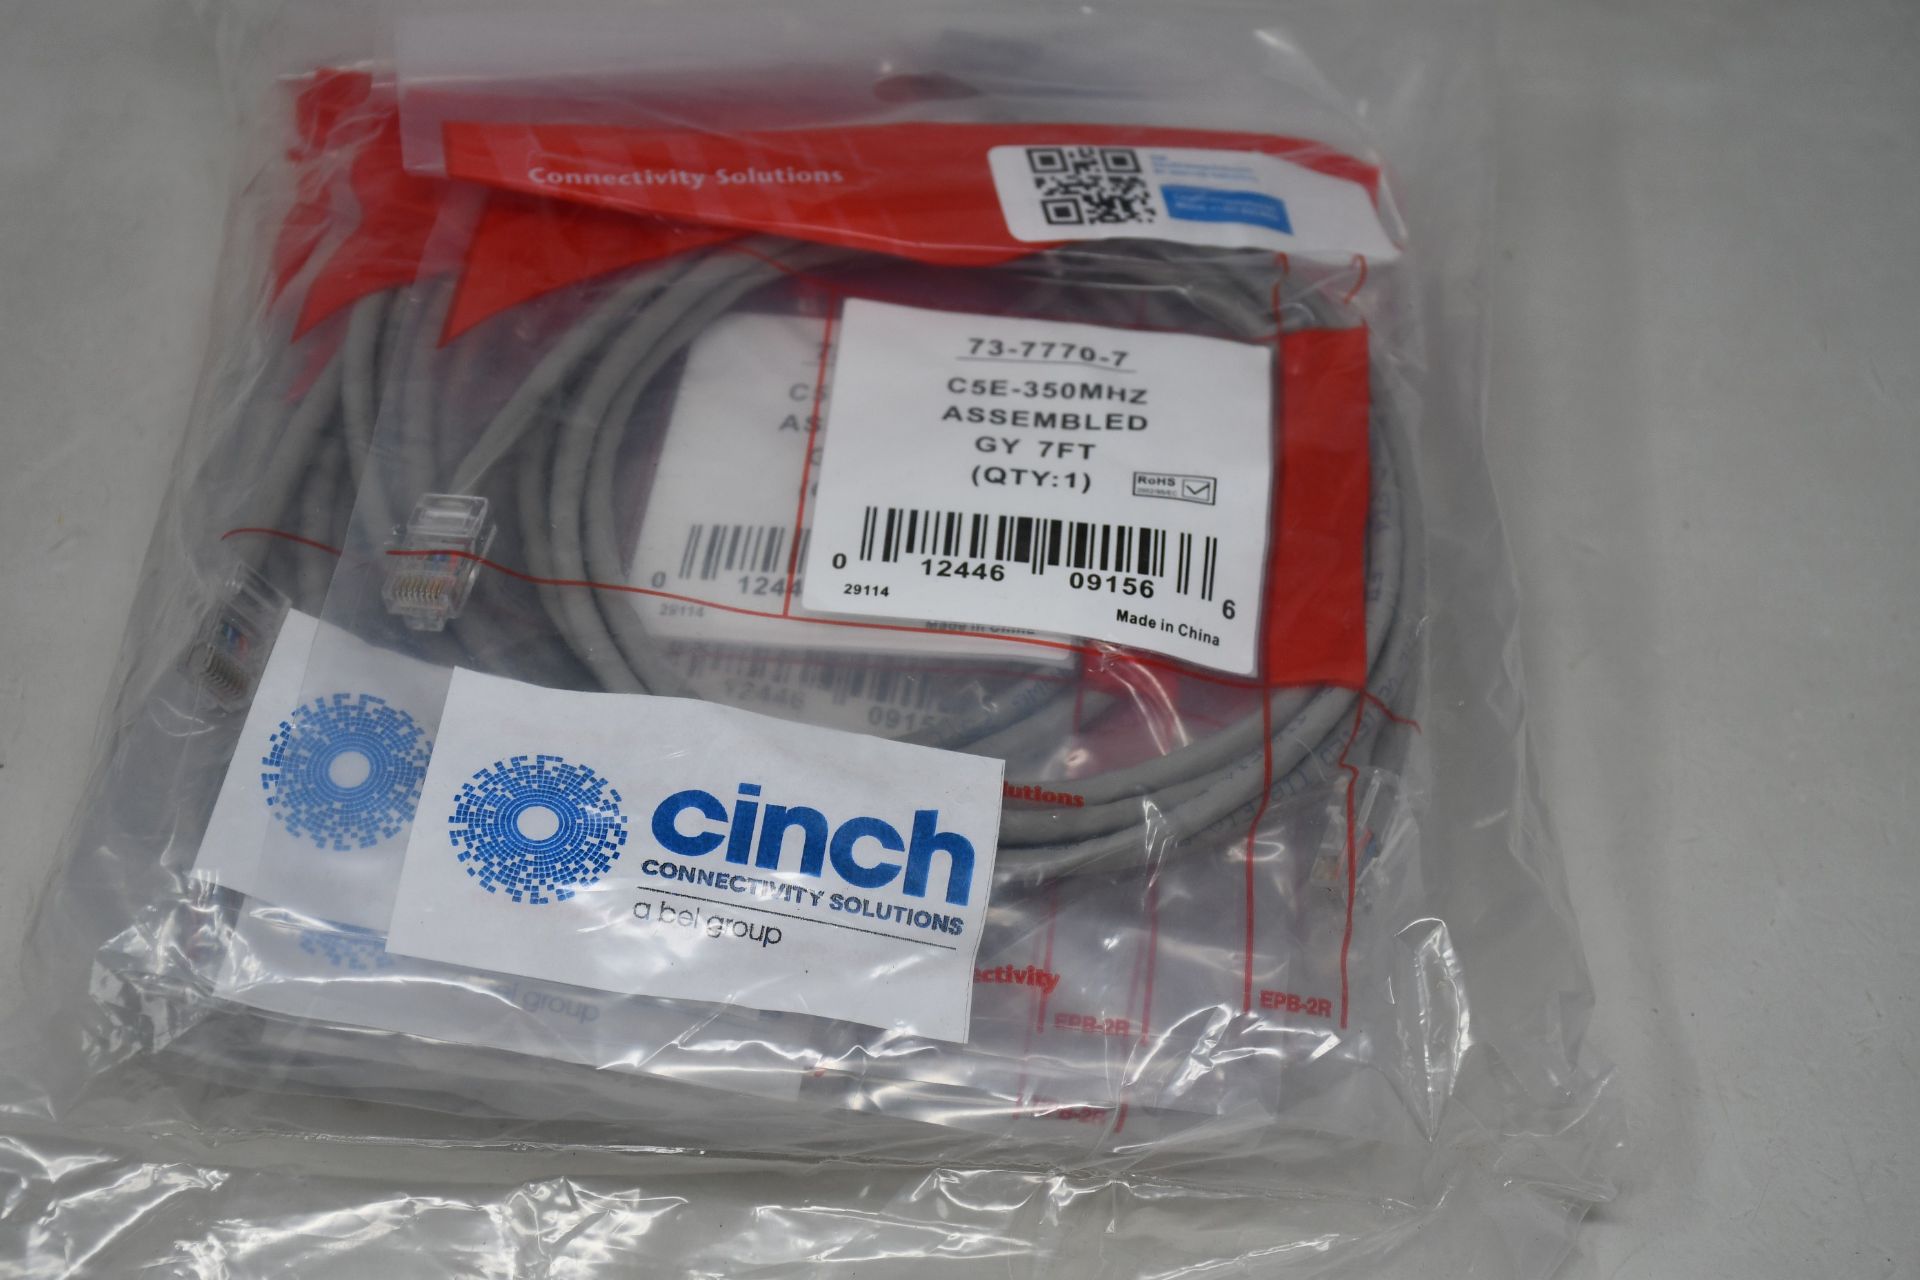 Five packs of ten as new 73-7770-7 Ethernet/Networking Cables in grey (7', C5E-350MHZ).